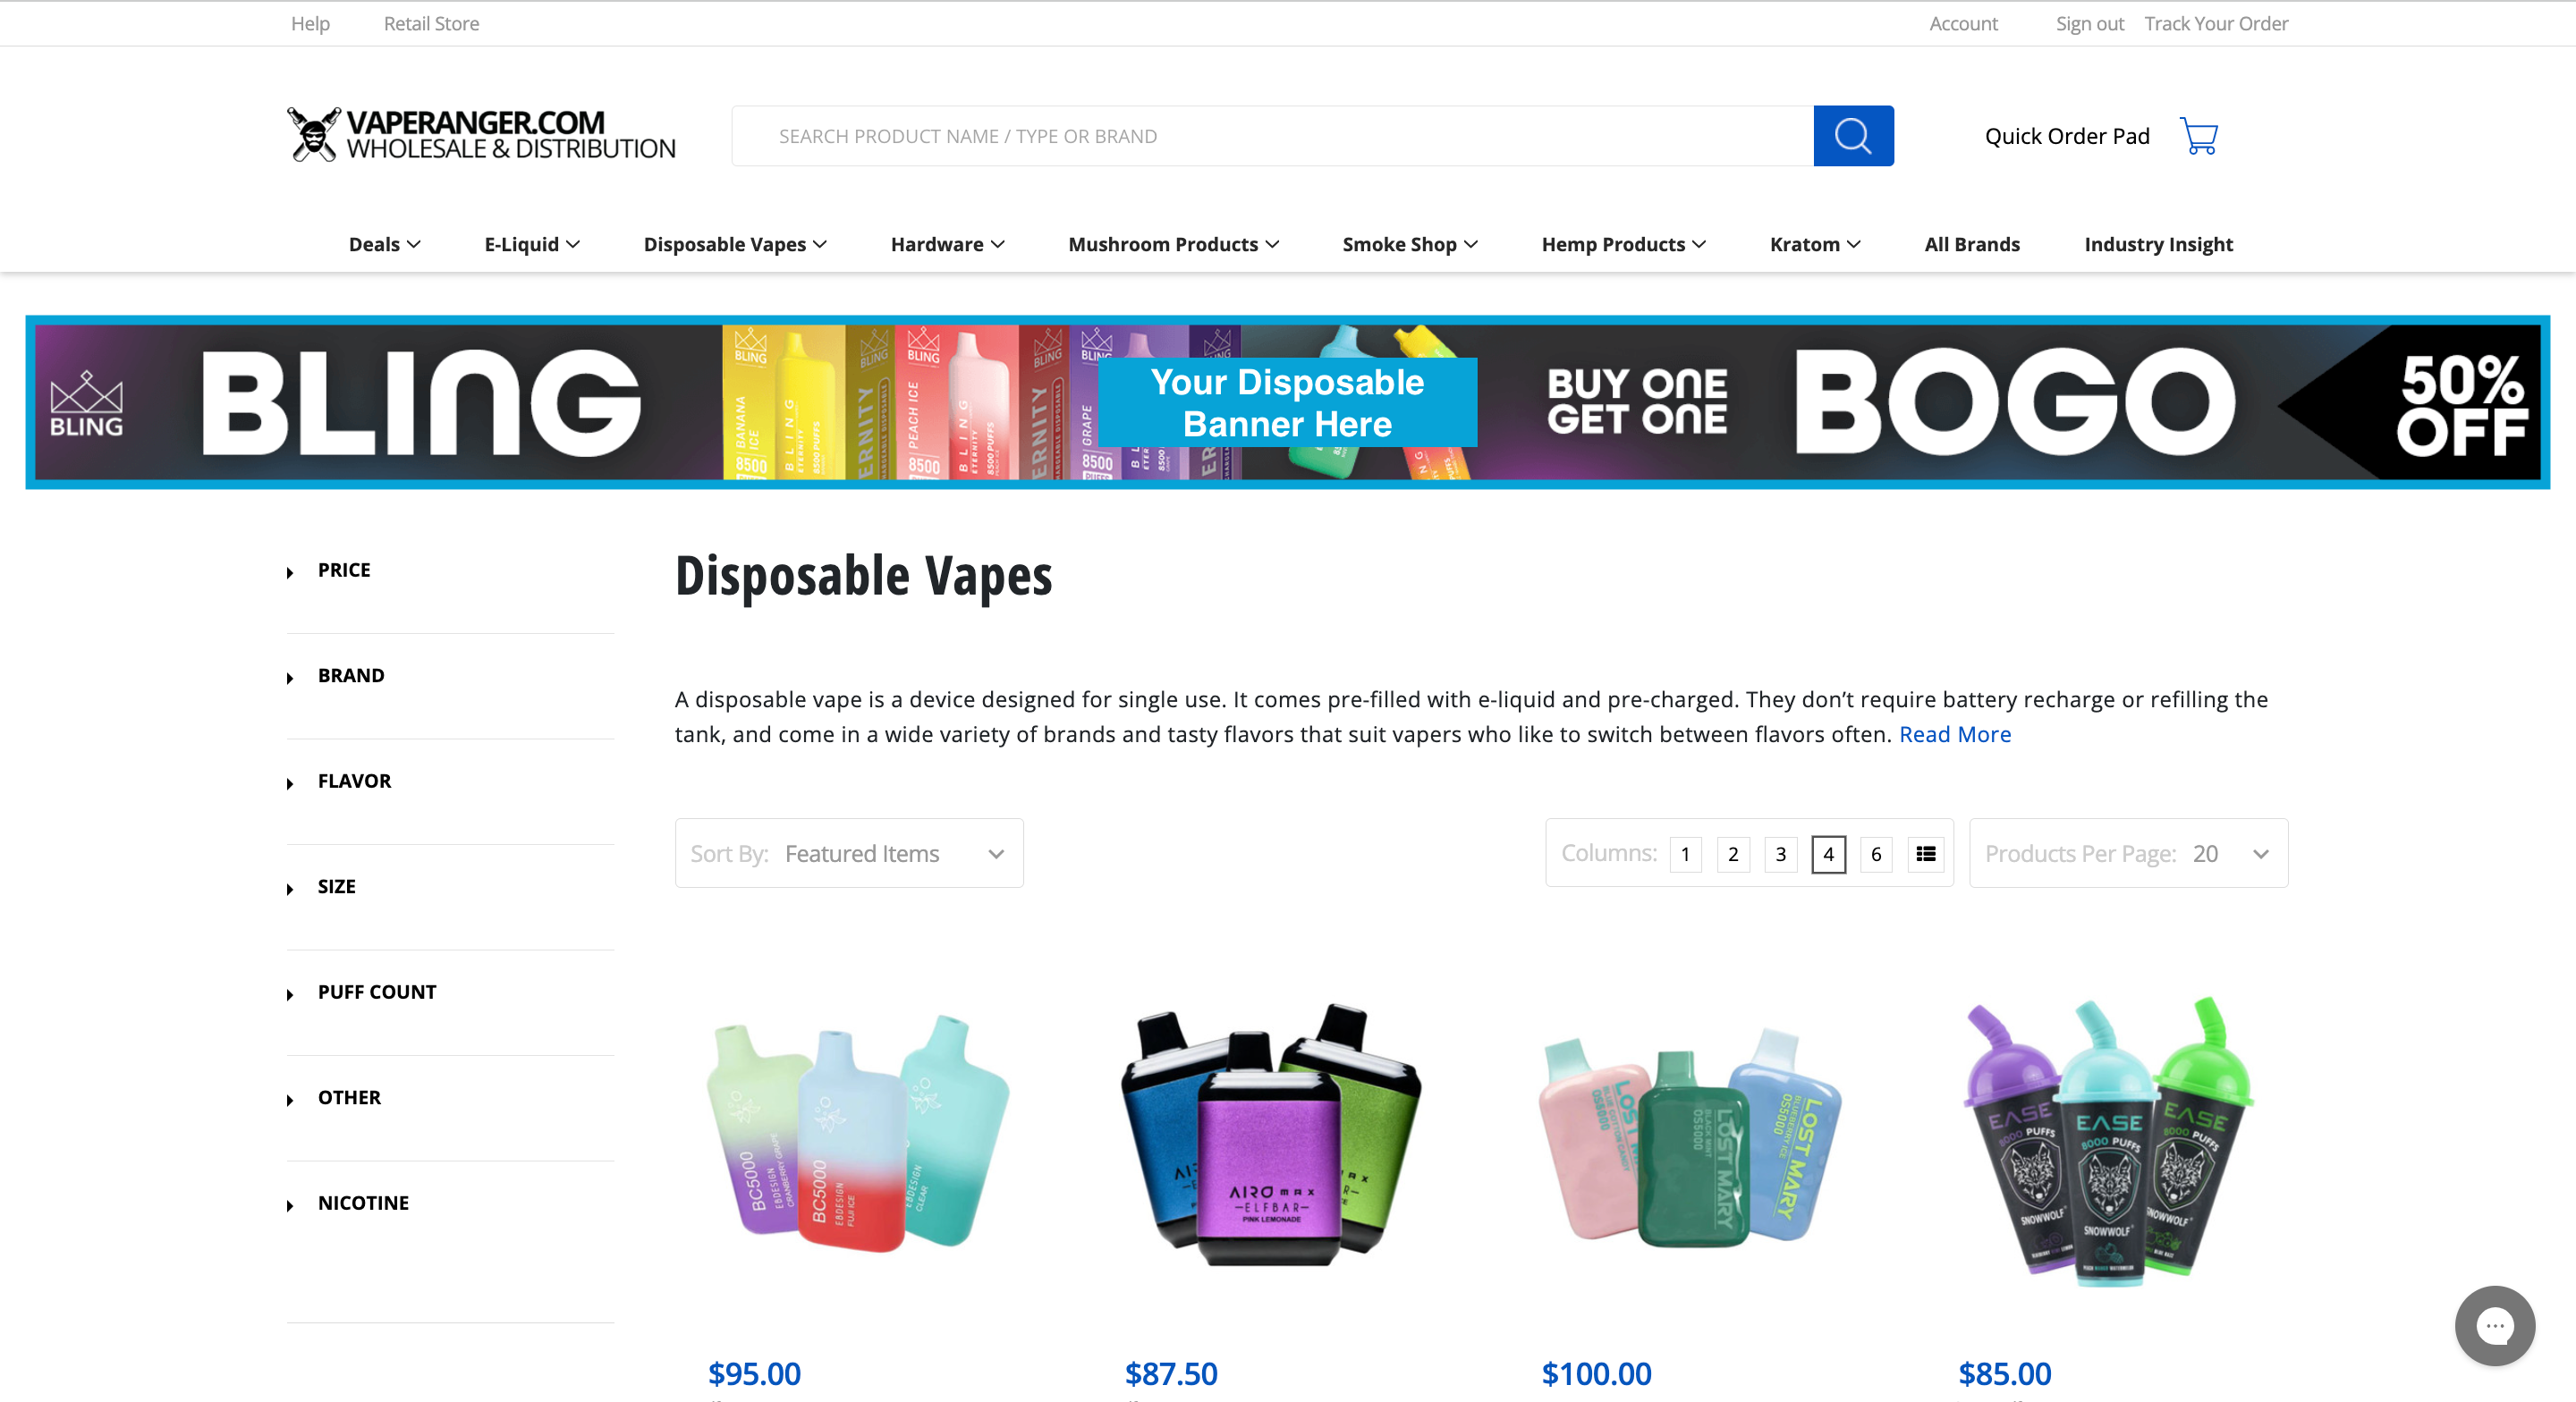 VR - Category Page Banners